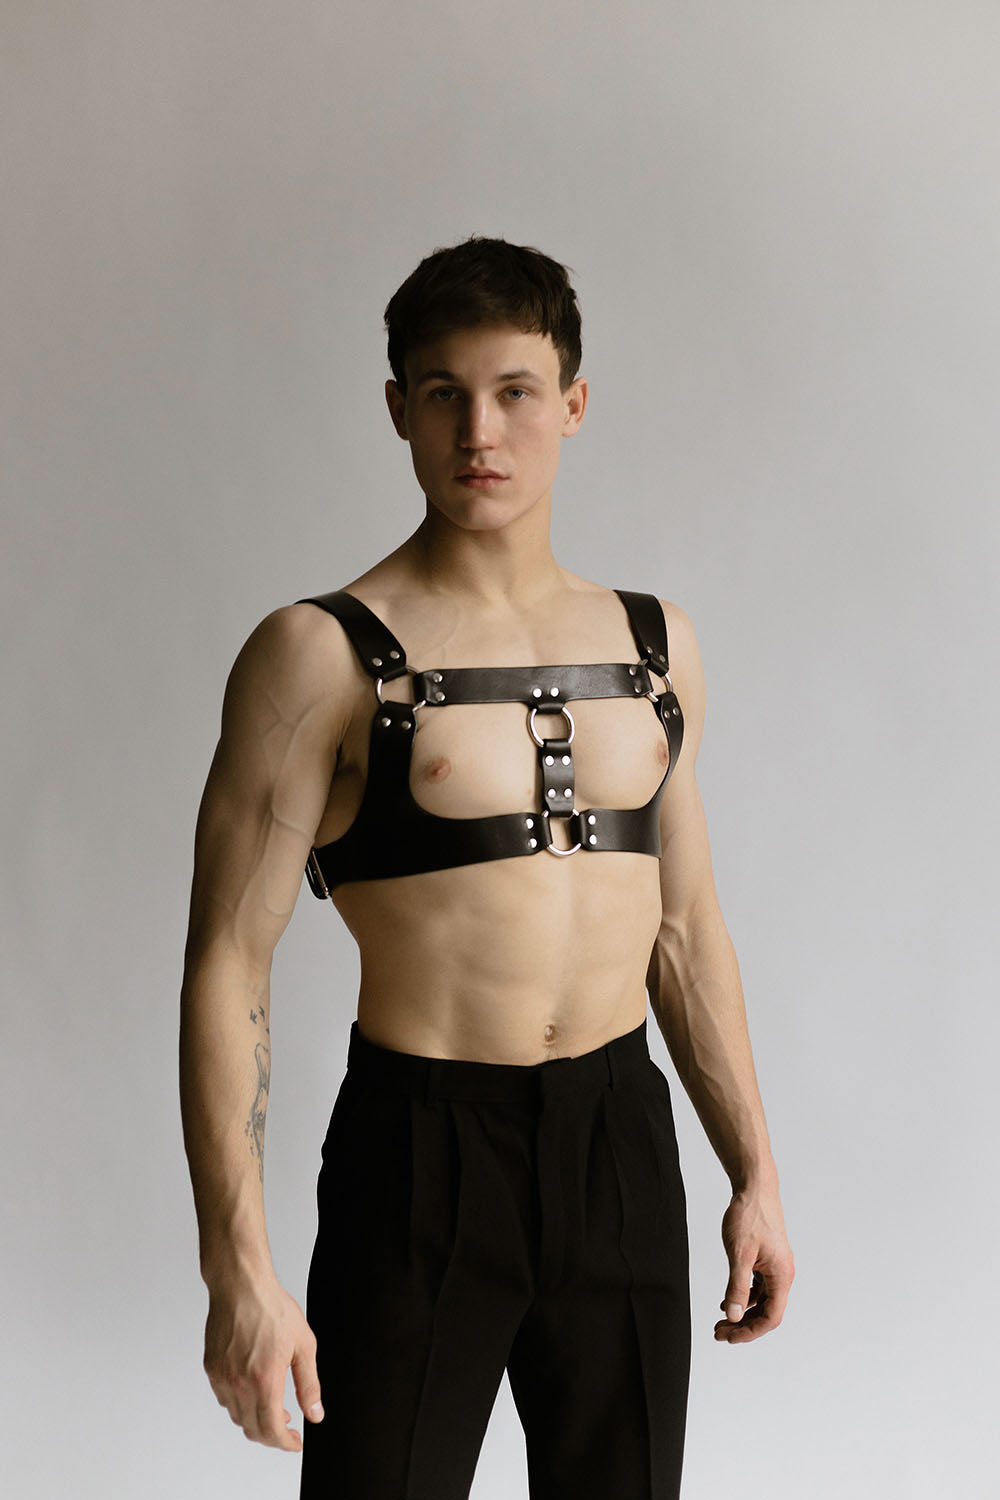 Anoeses leather men harness in black color